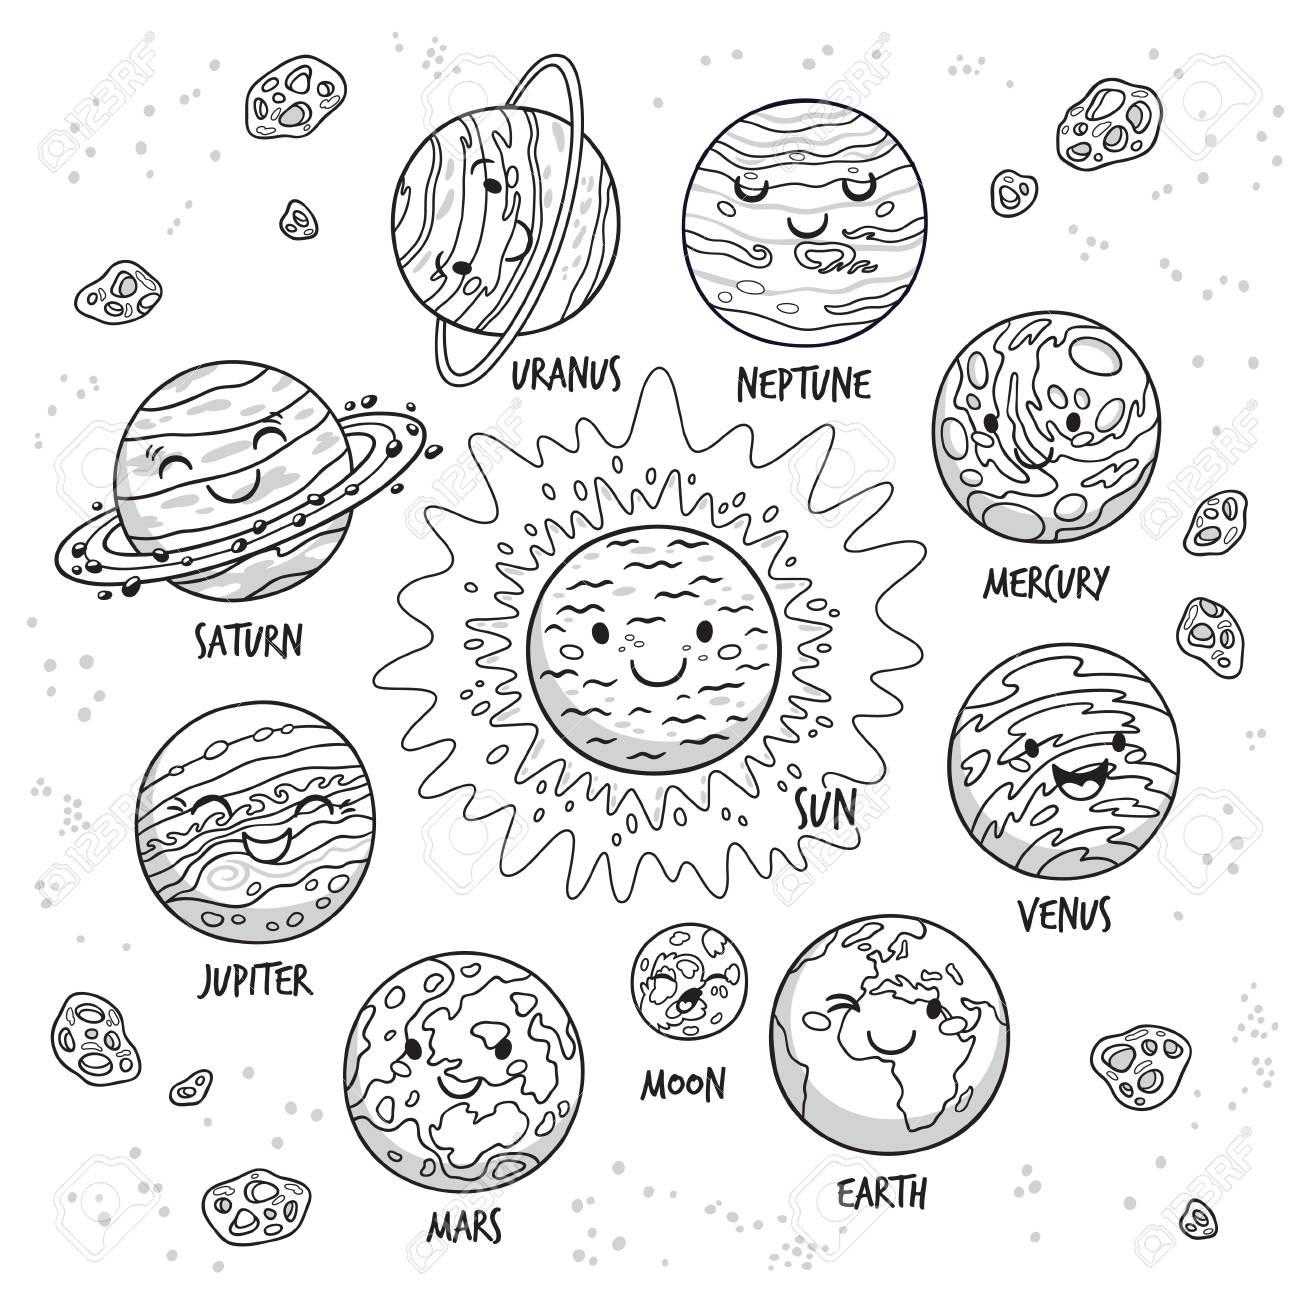 95292486-solar-system-planets-character-set-in-cartoon-style.jpg